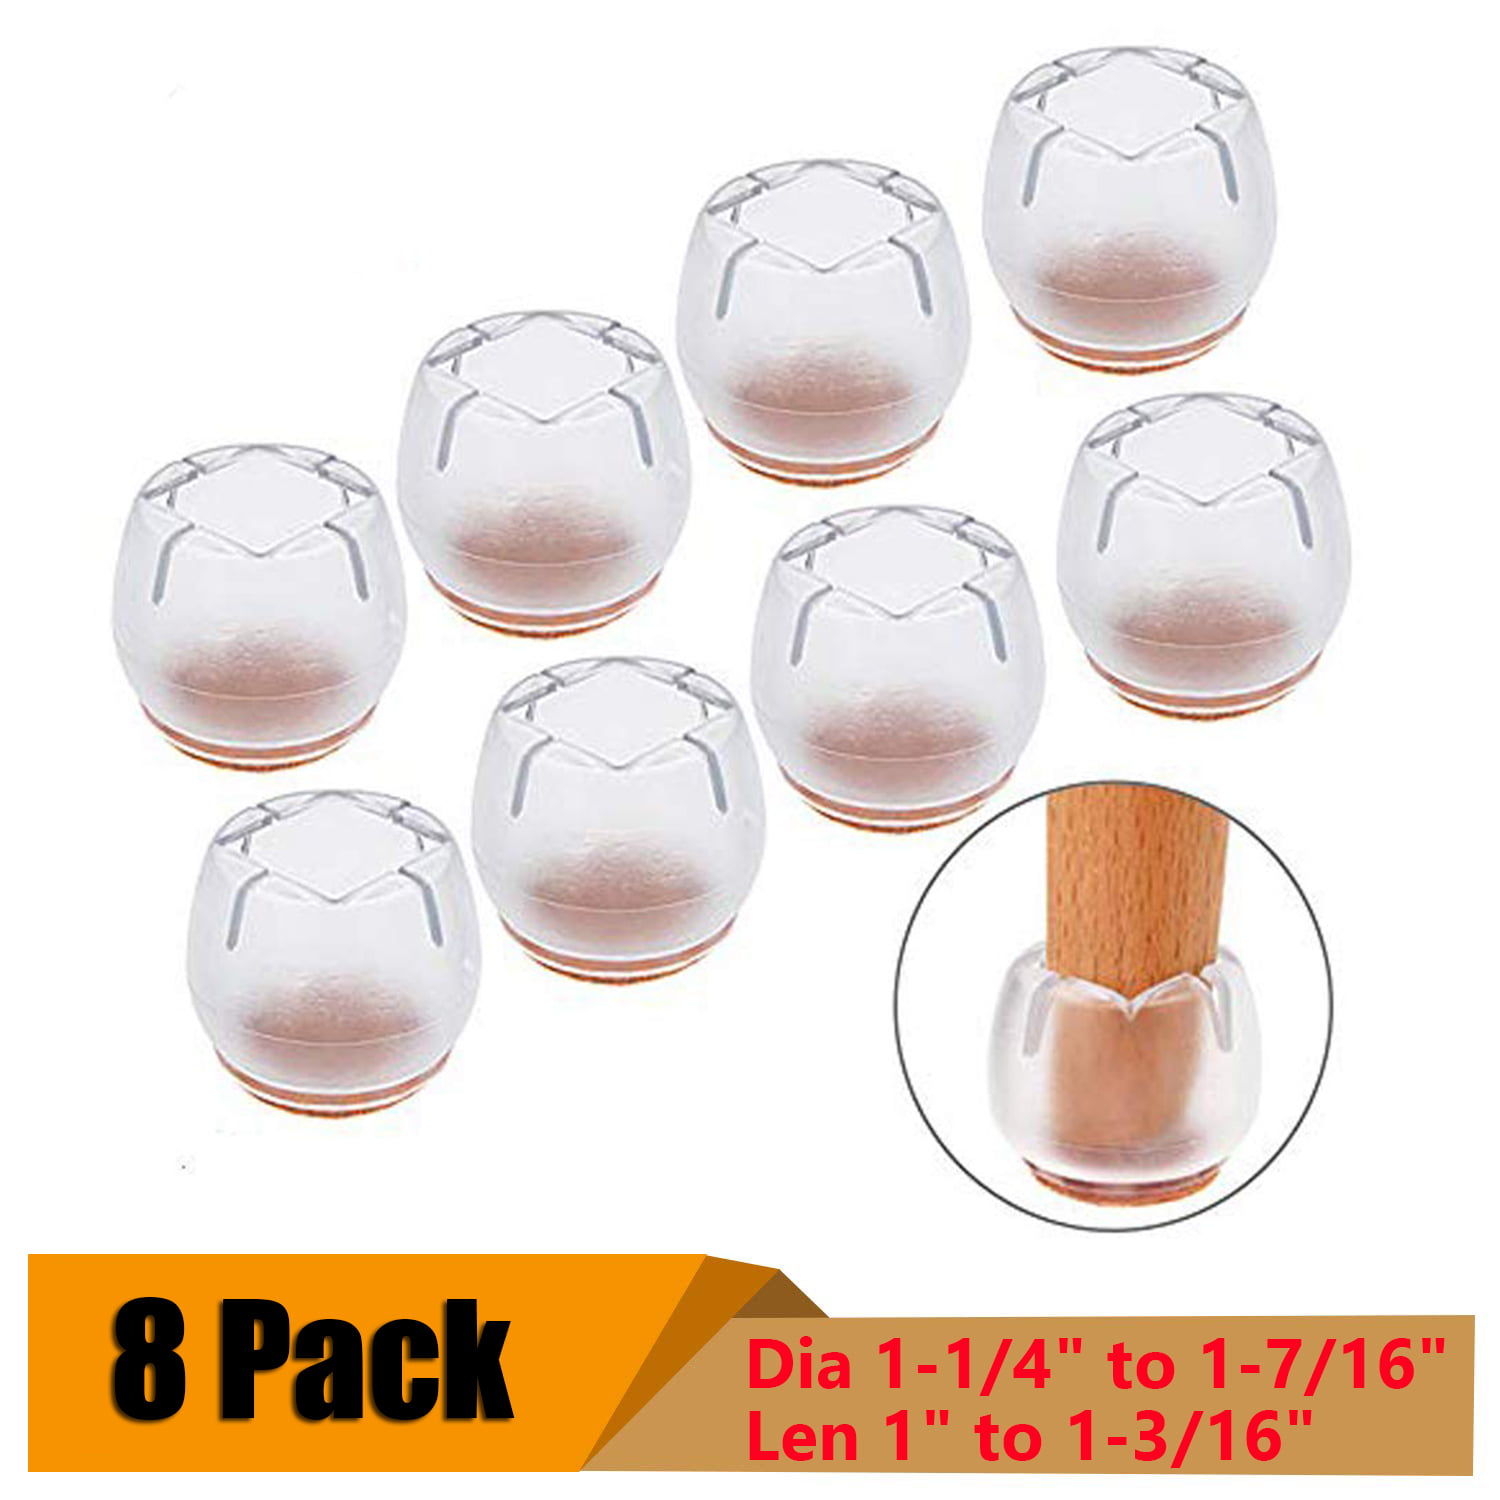 Details about   10pcs Chair Table Leg Cap Floor Protector Silicone Table Foot Cover Home Supply 